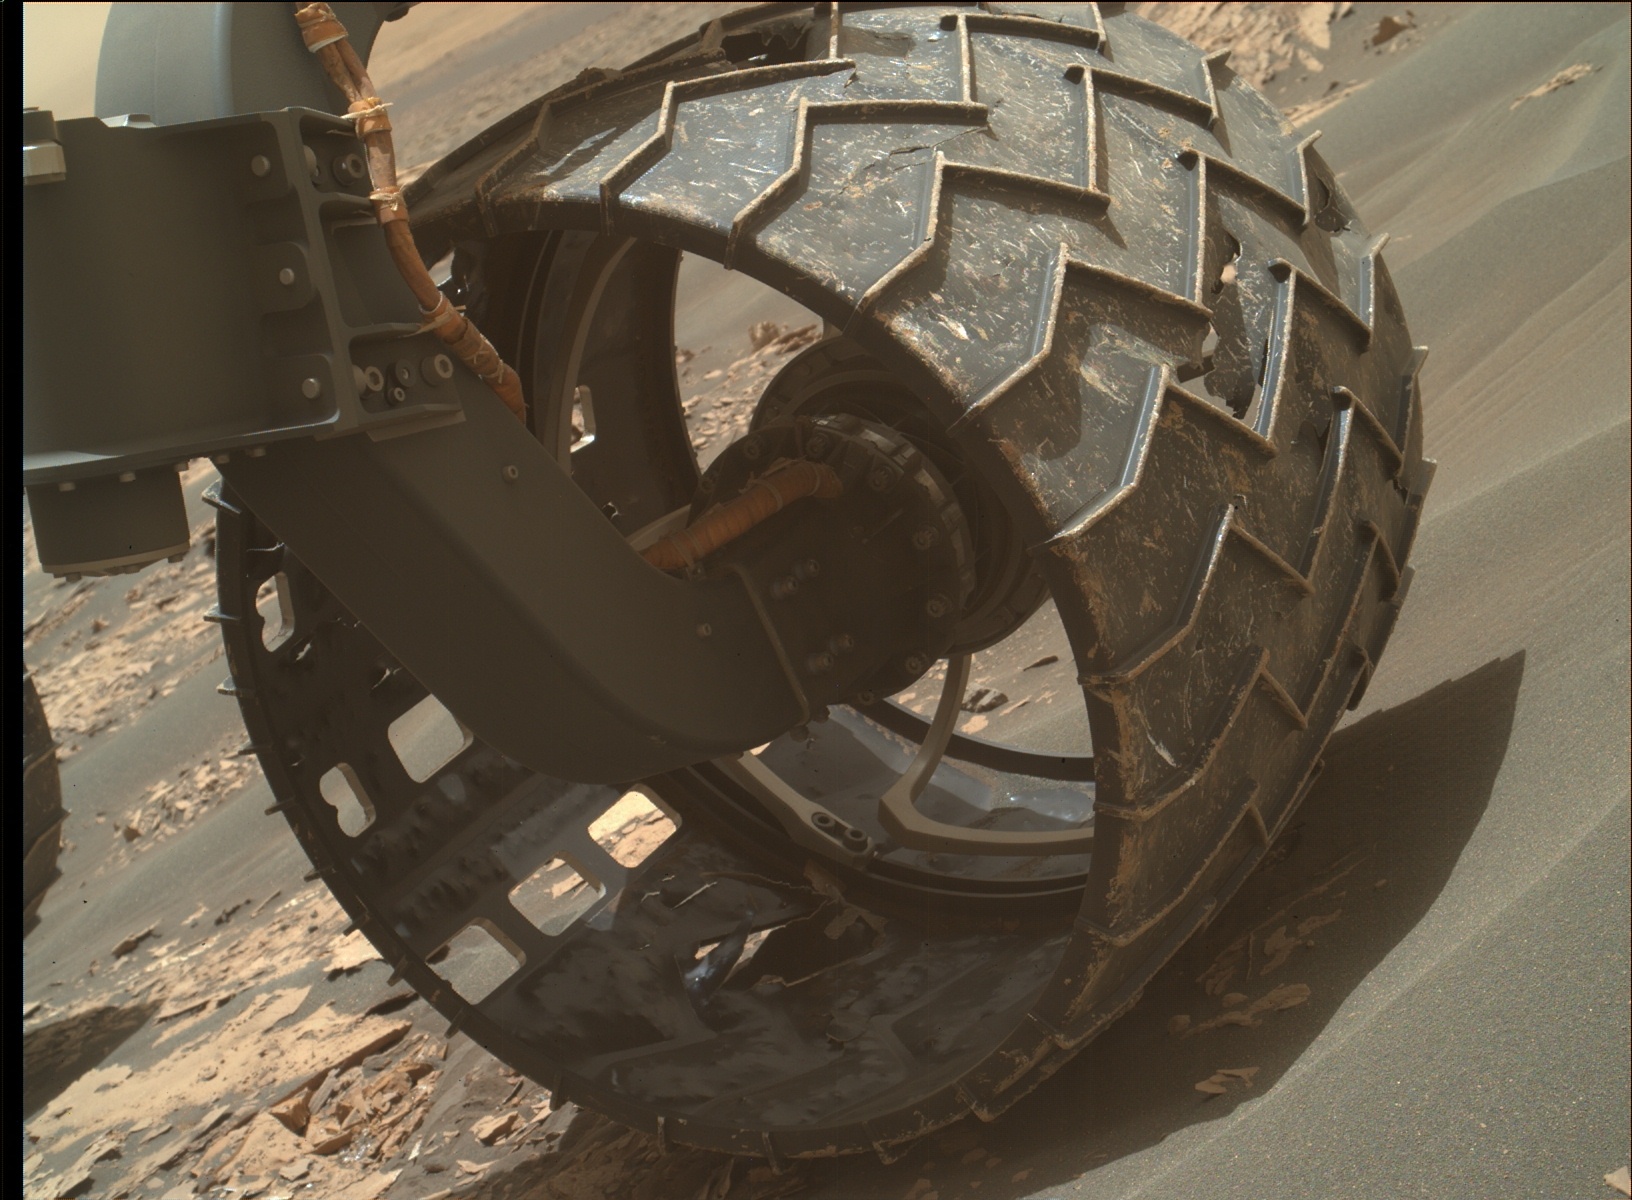 Nasa's Mars rover Curiosity acquired this image using its Mars Hand Lens Imager (MAHLI) on Sol 1730